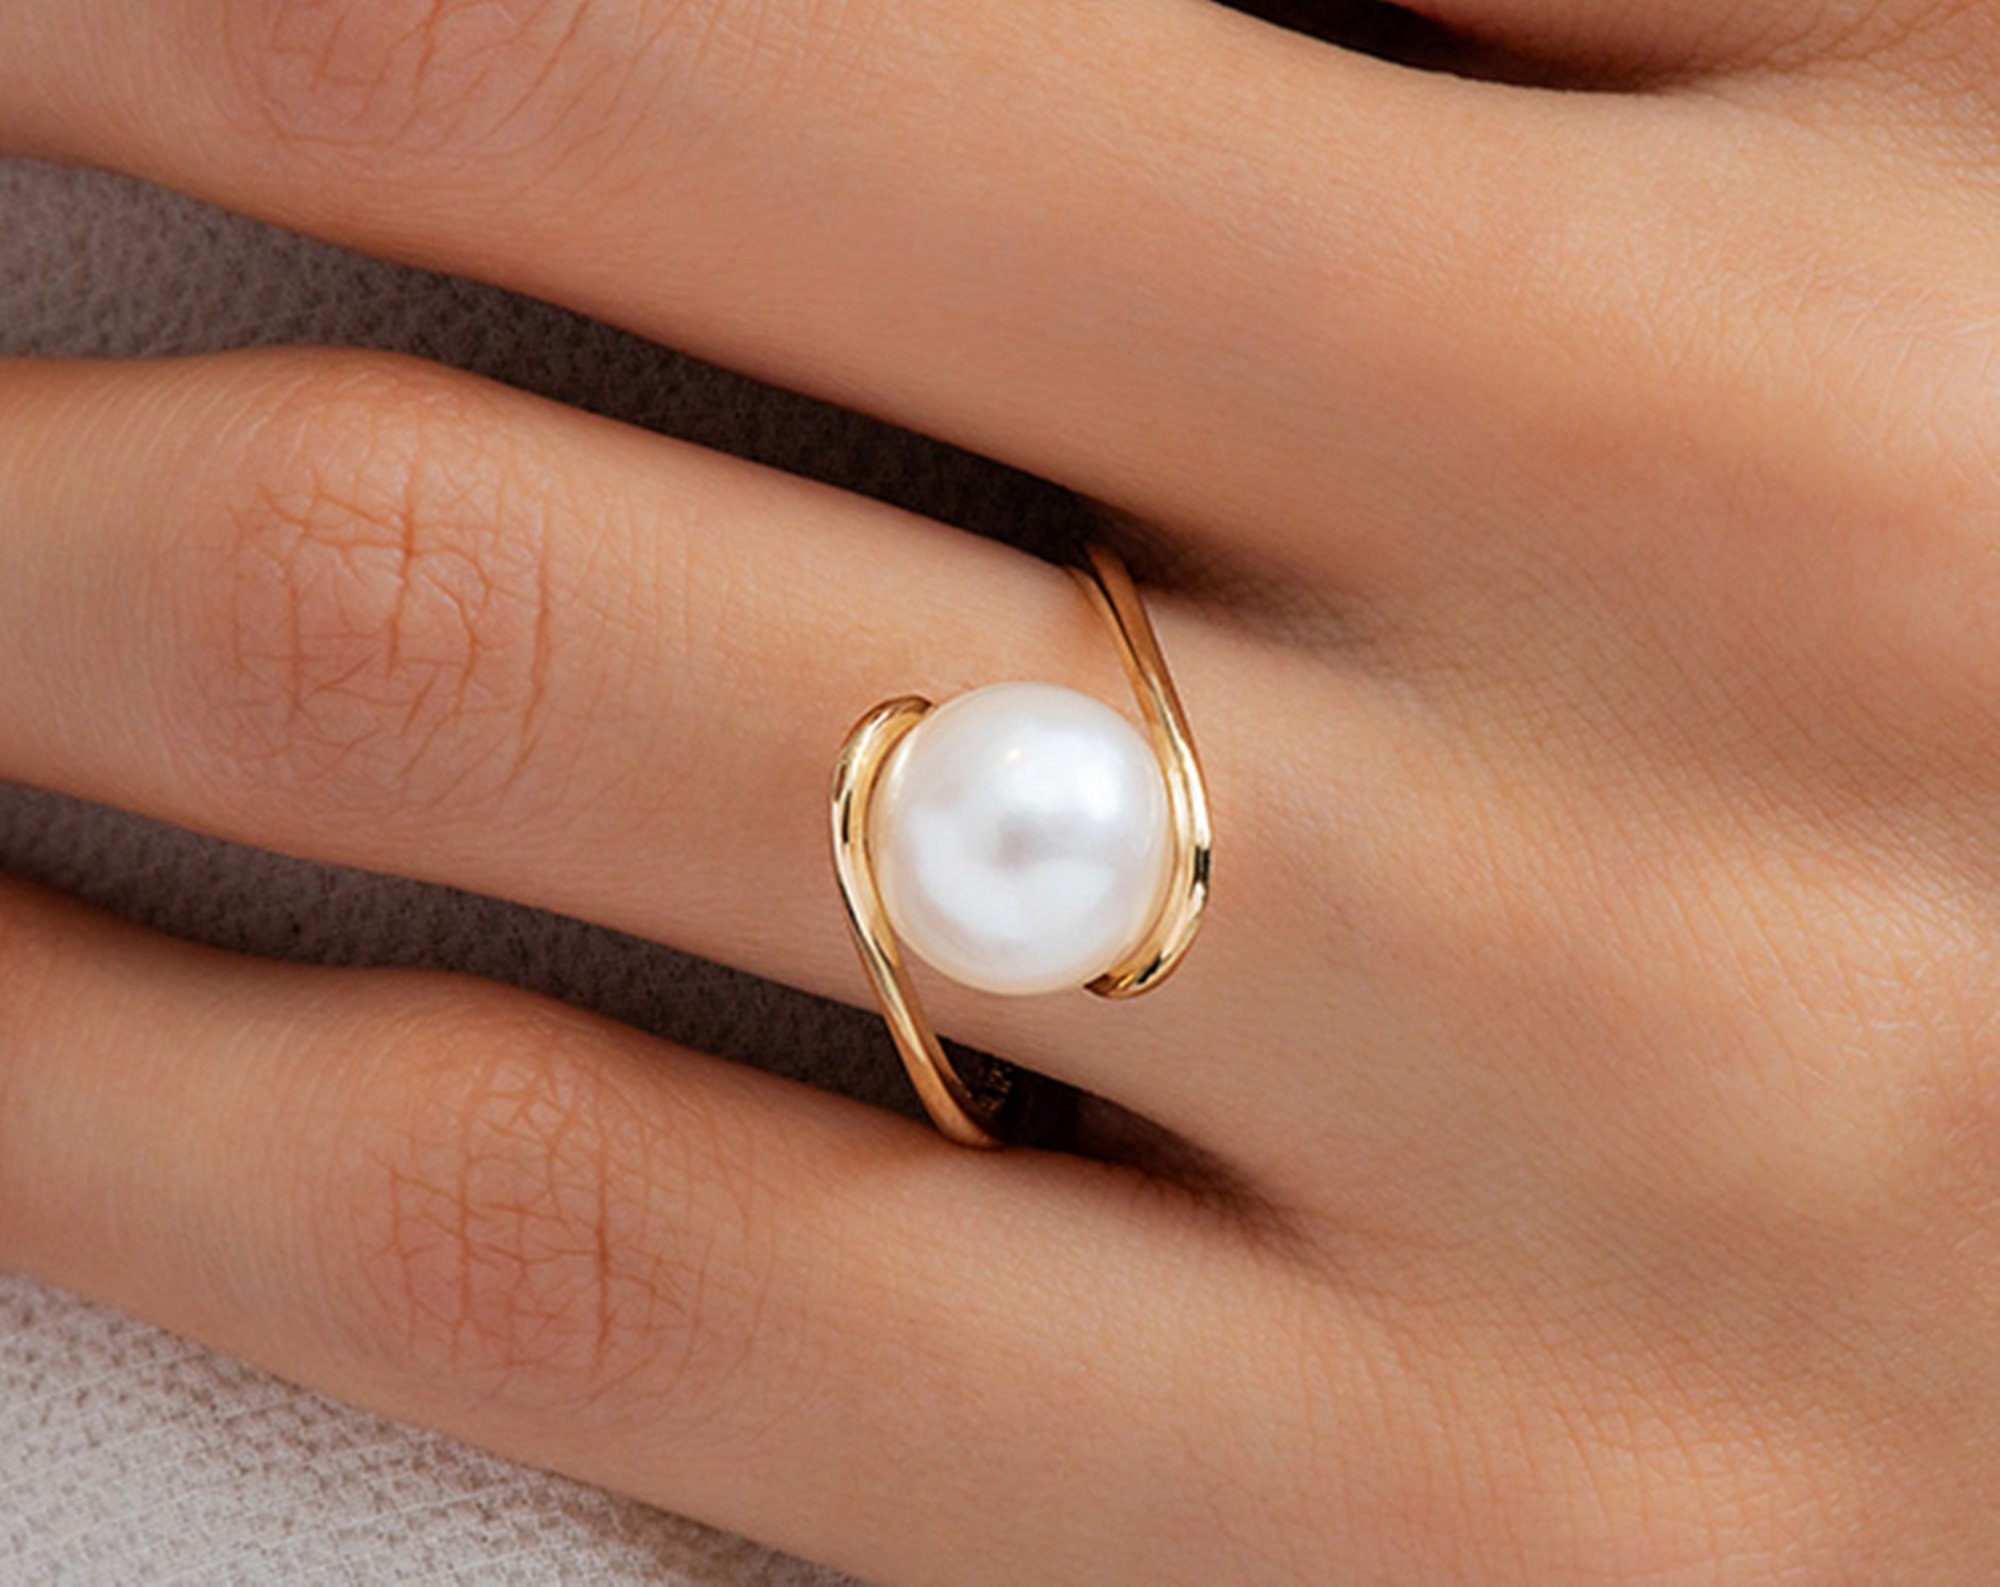 Gemstone Know few things before wearing pearl ring in hand here are all the  informatin about wearing pearl - Astrology in Hindi - Gemstones: मोती पहनने  से पहलें इन बातों का रखें